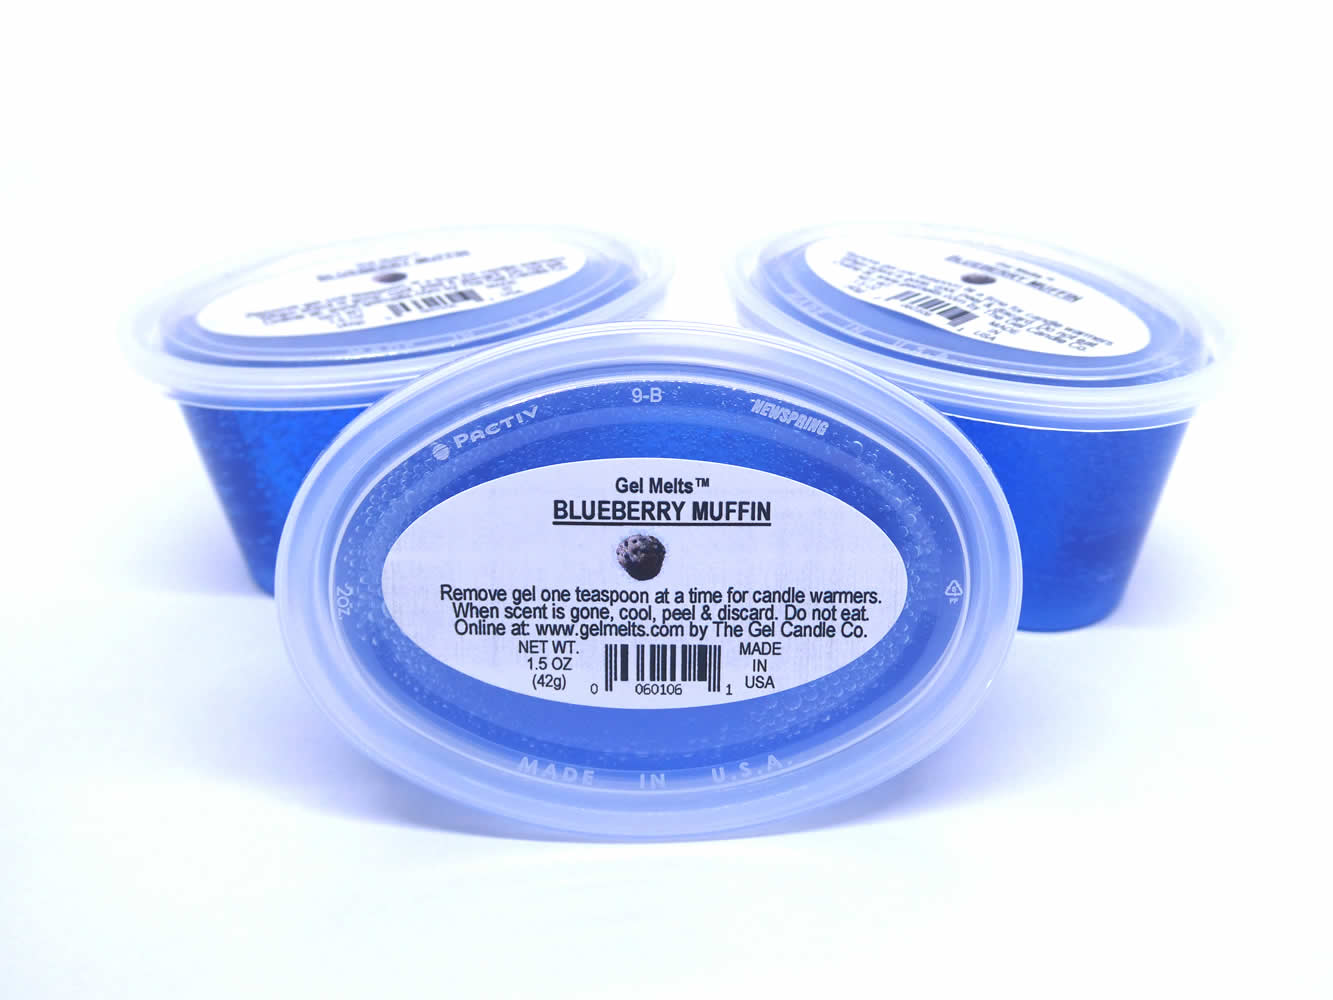 Blueberry Muffin scented Gel Melts™ Gel Wax for warmers - 3 pack